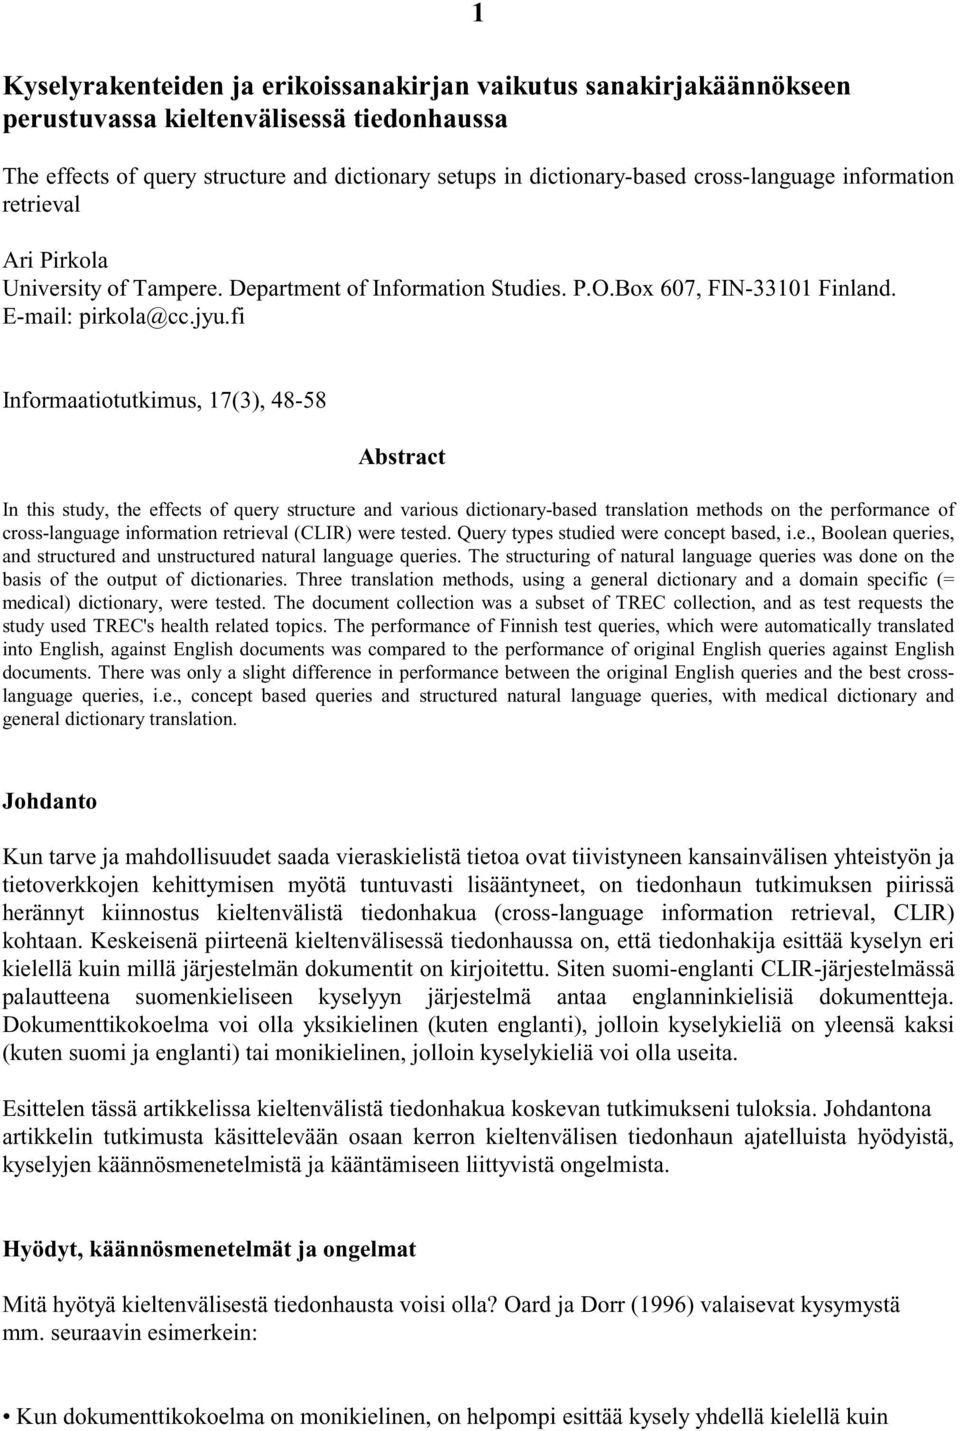 fi Informaatiotutkimus, 17(3), 48-58 Abstract In this study, the effects of query structure and various dictionary-based translation methods on the performance of cross-language information retrieval